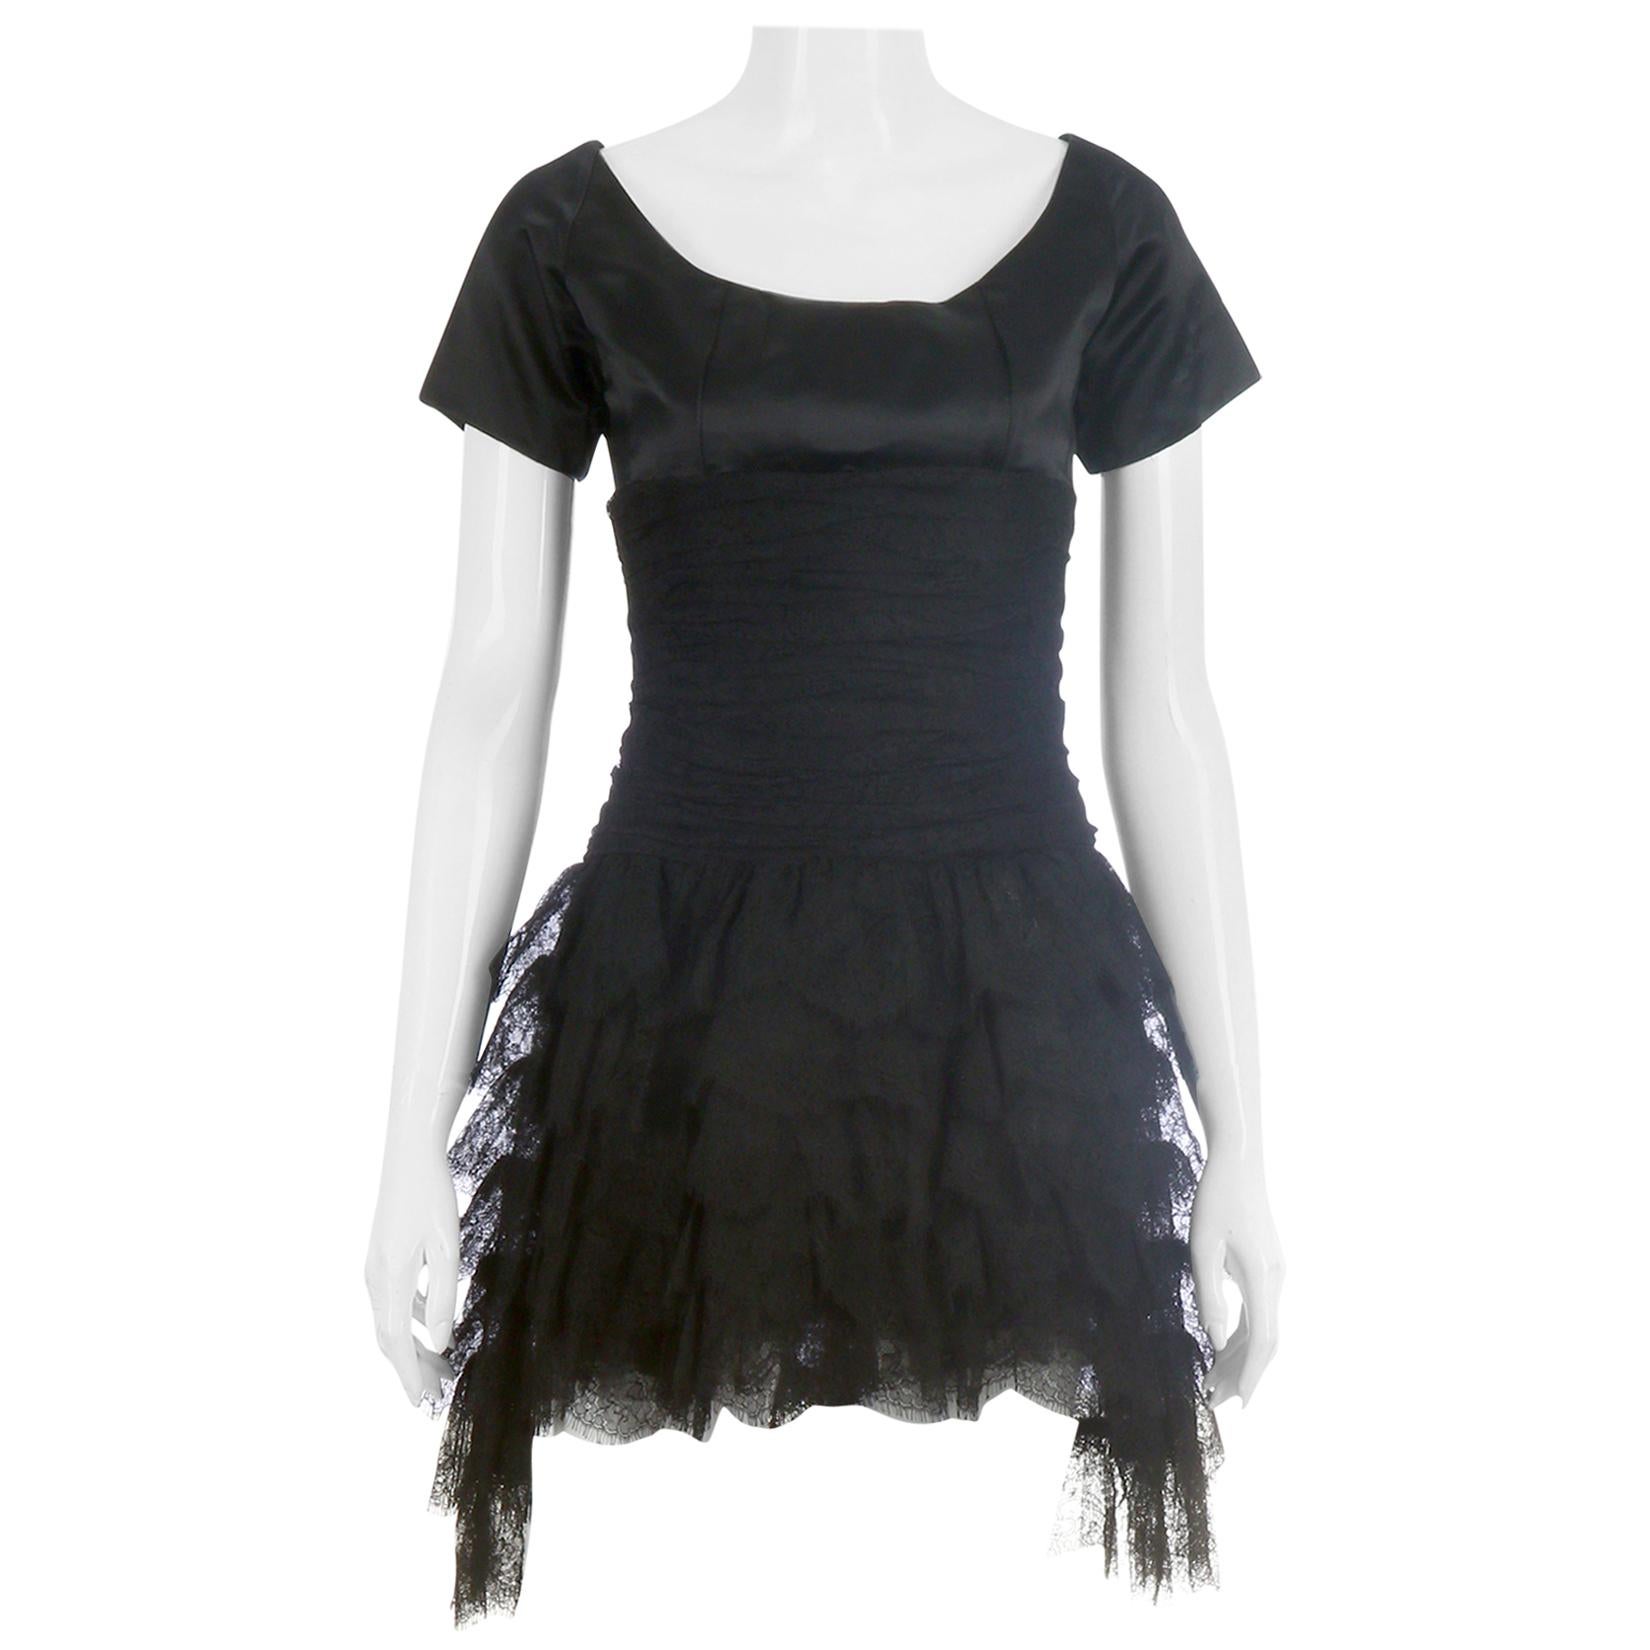 1980's Chanel black short-sleeved mini dress comprised of a medium weight silk fitted upper bodice, a horizontally ruched lace mid-section, a fitted waist made of gathered lace and a multi-tiered lace skirt. The dress fastens down center back by a